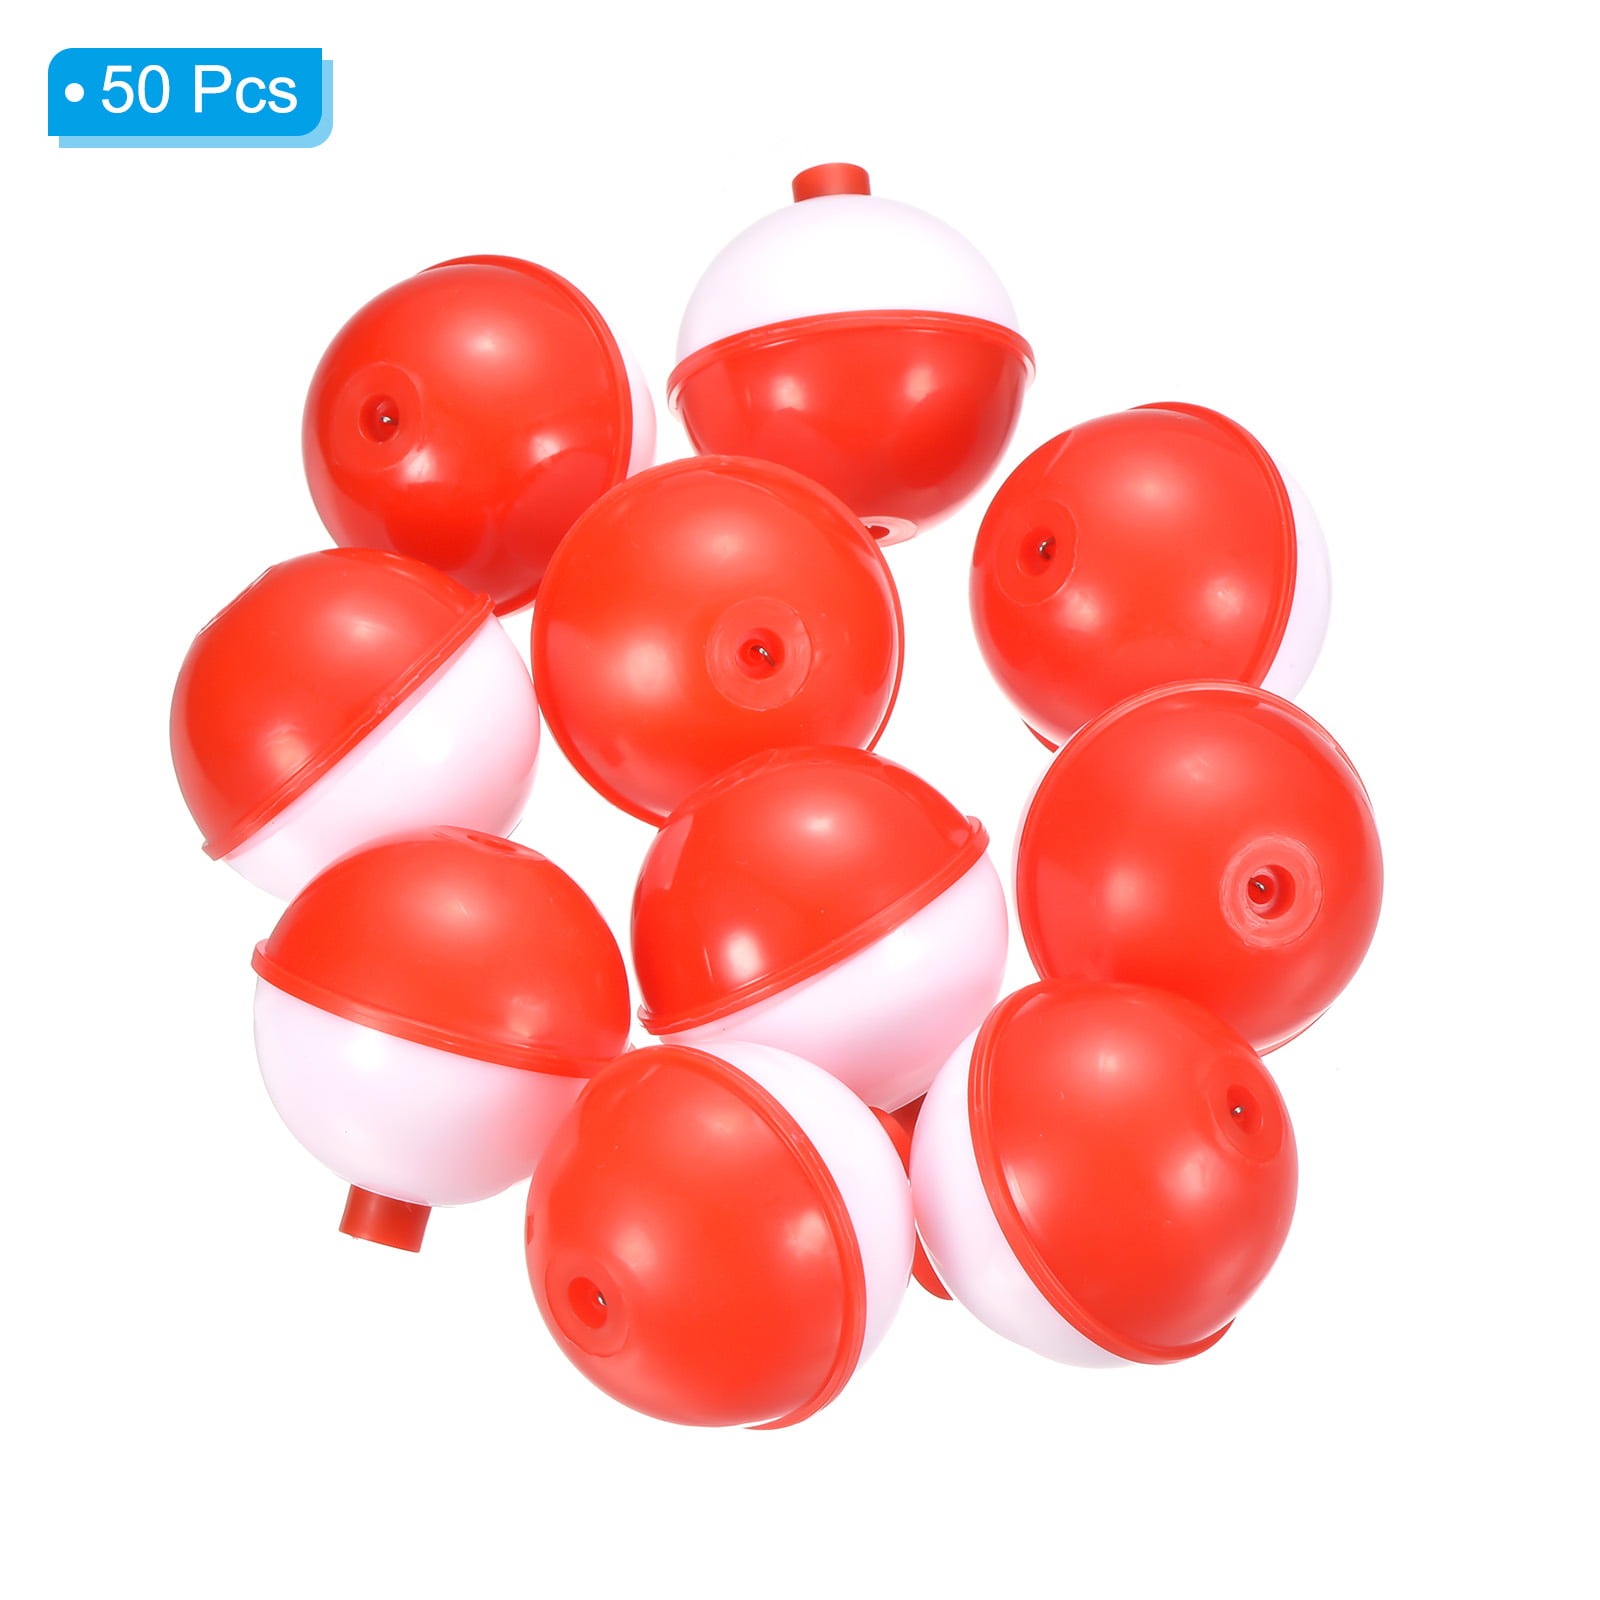 SYOSI Fishing Bobbers Assortment, Large & Small Red and White